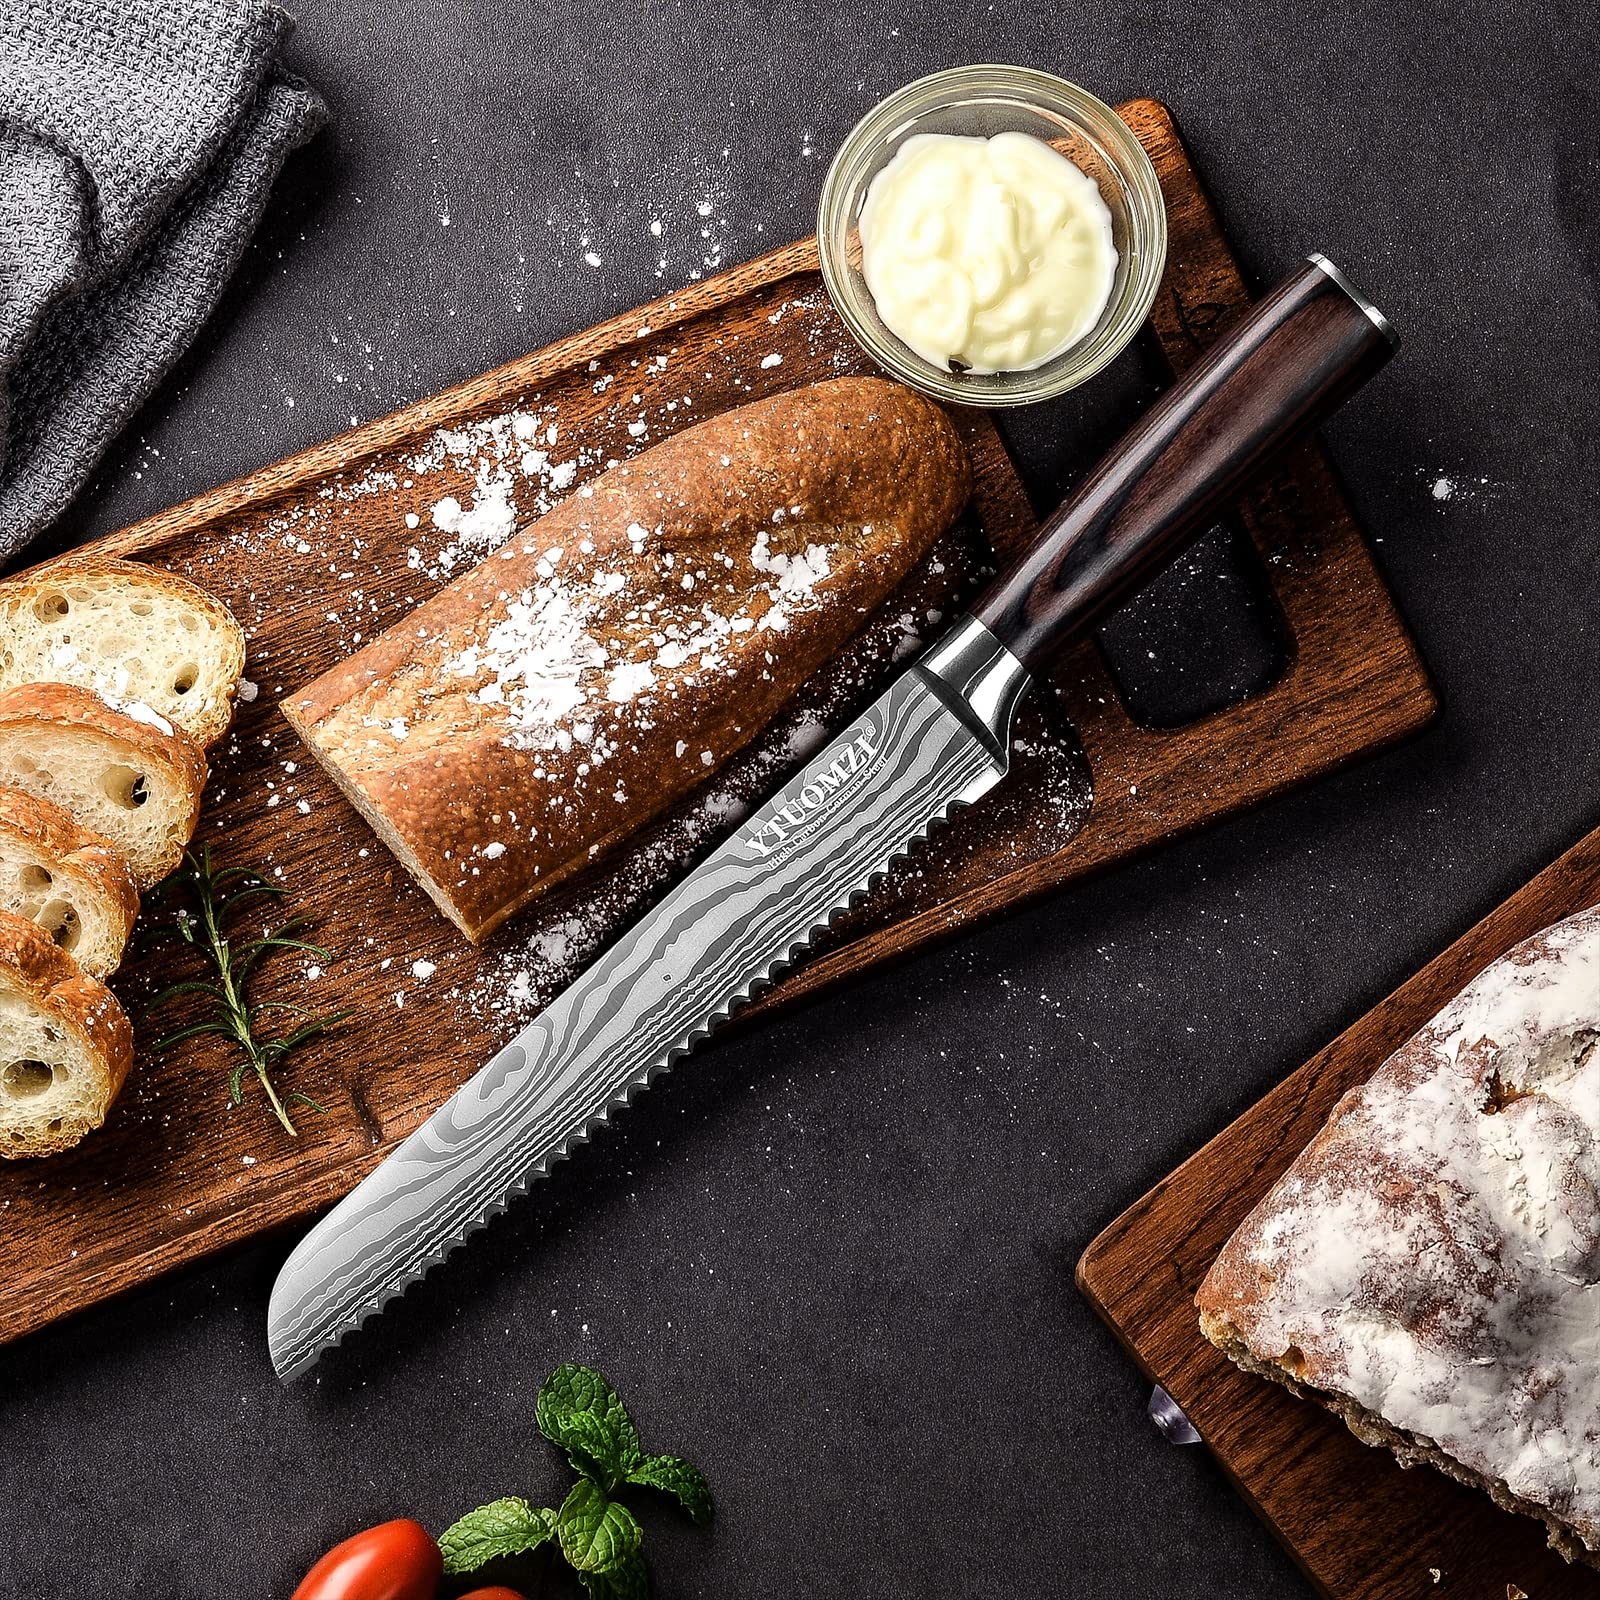 Ytuomzi Serrated Bread Knife 8 Inch, High Carbon Stainless Steel Professional Bread Cutting Knife, Ultra Sharp for Homemade Bread, Pastries and Bagels